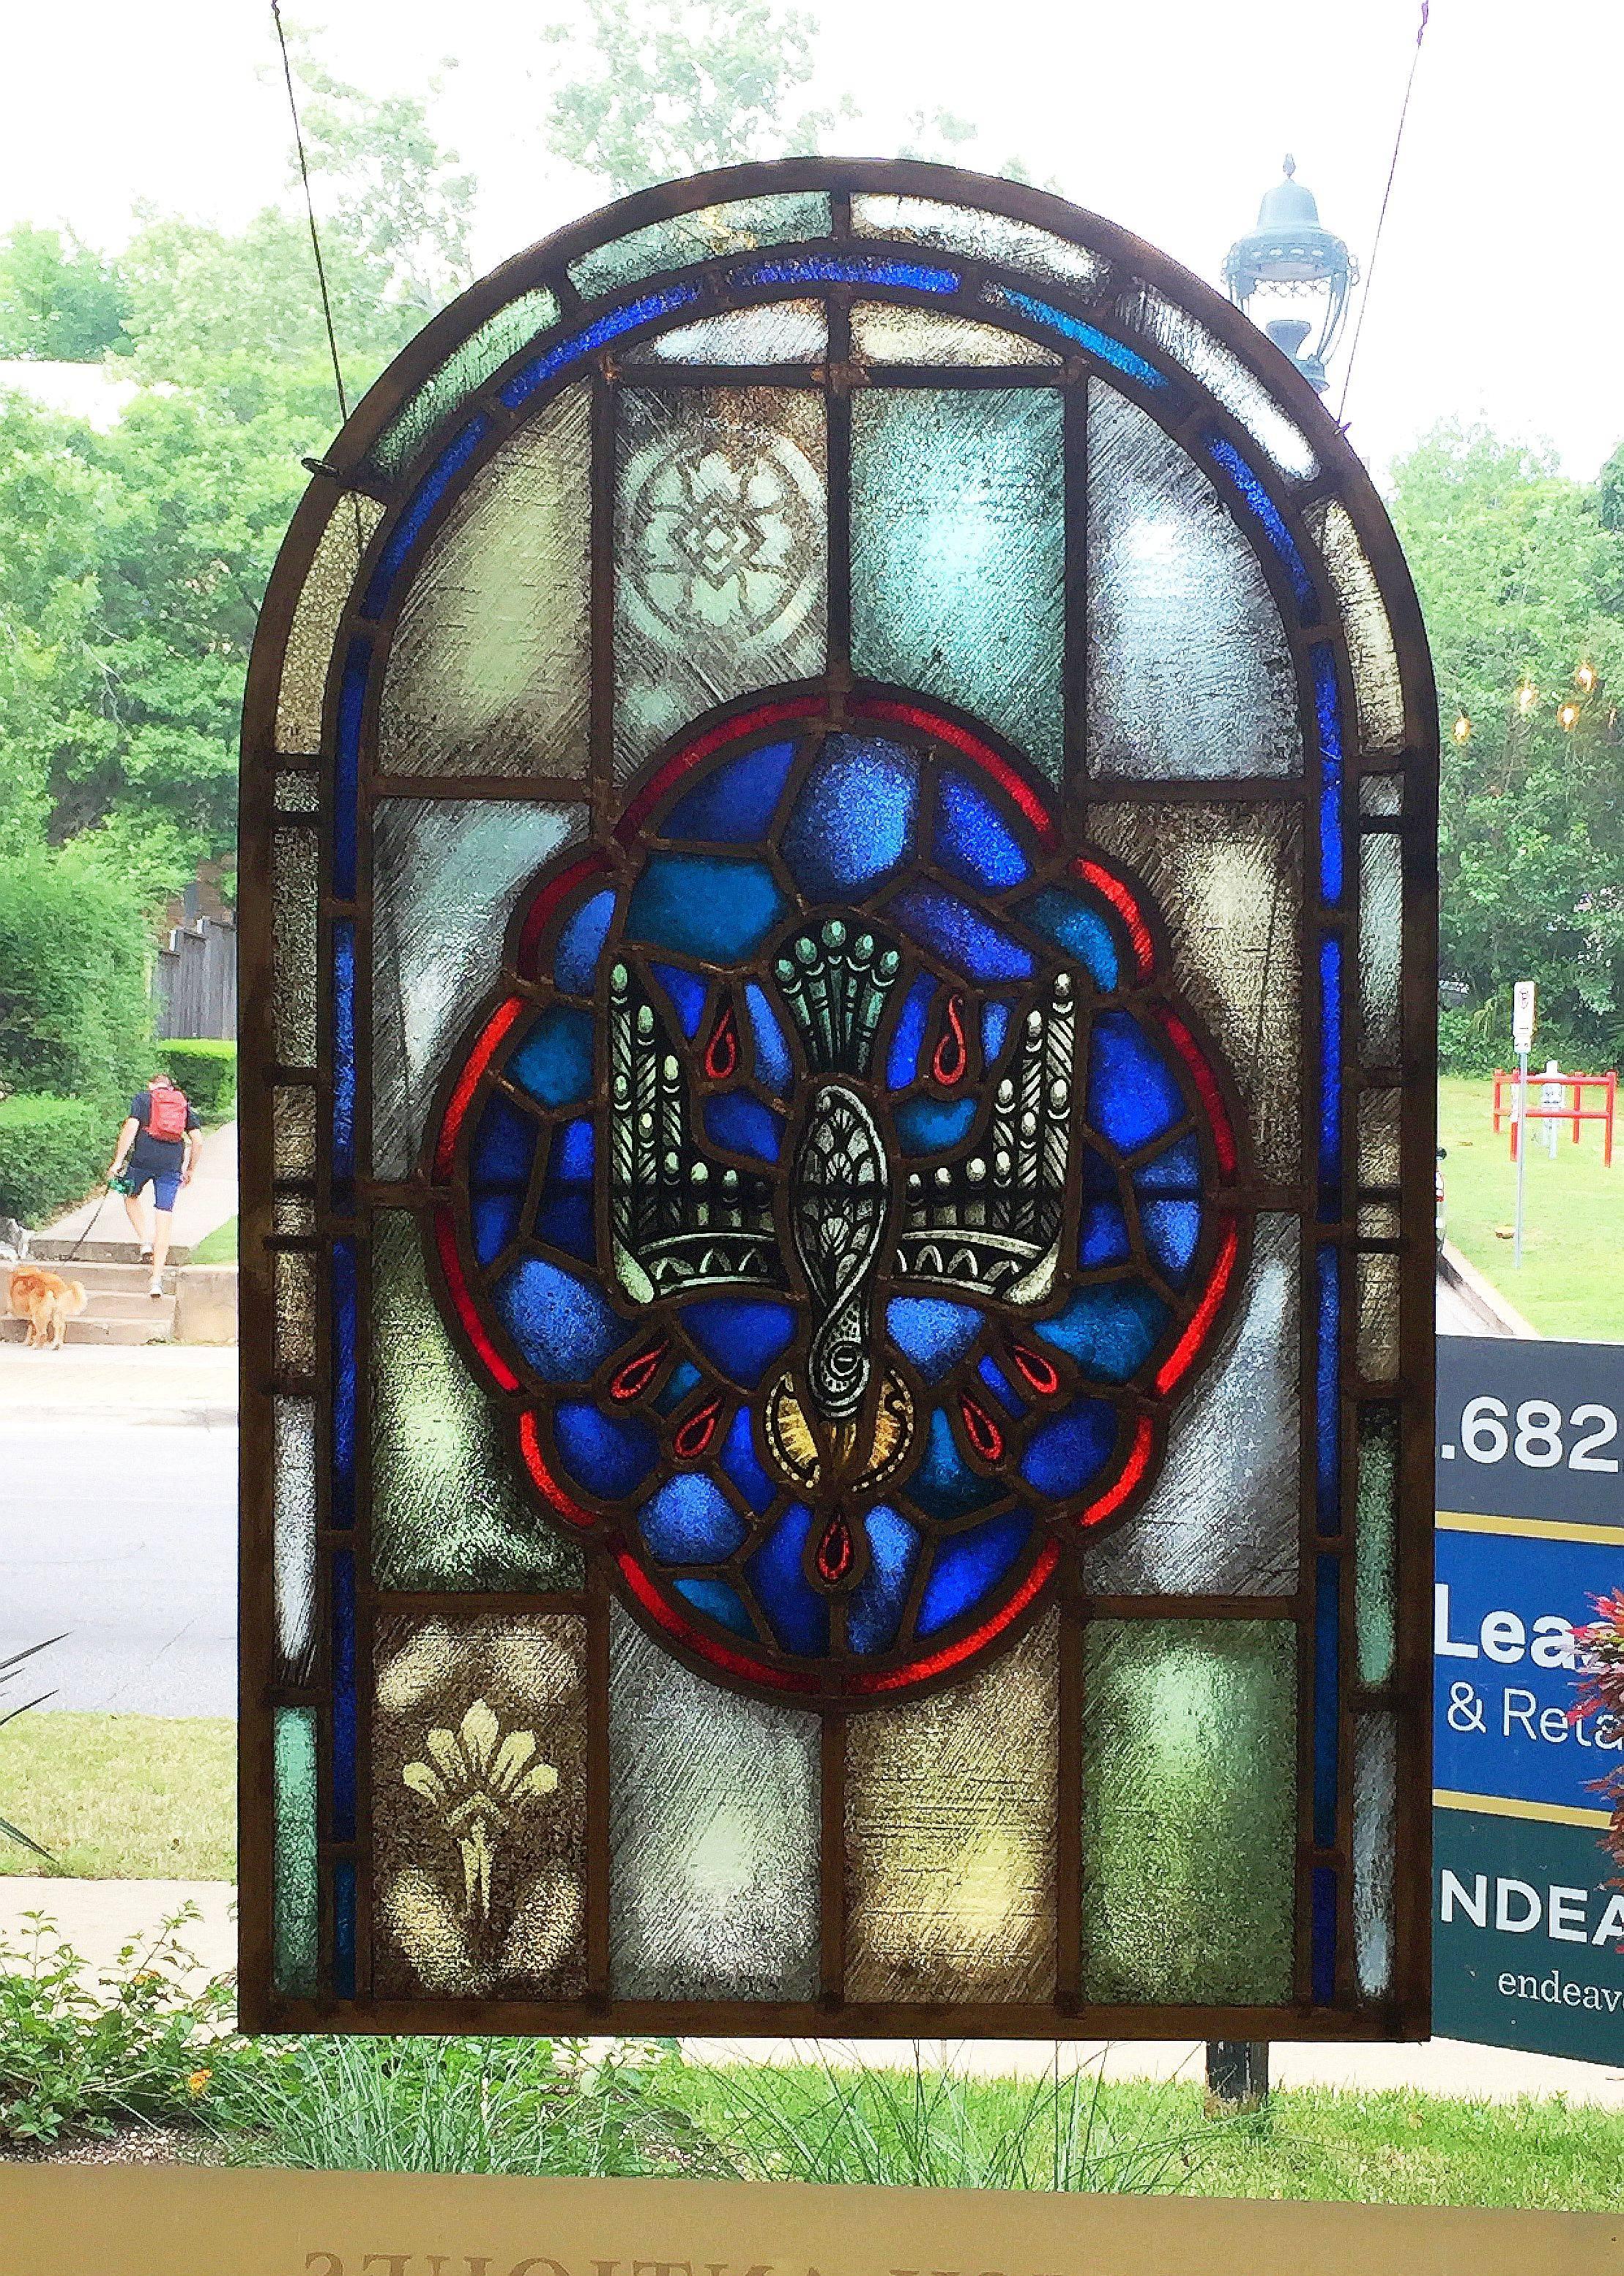 A fine American ecclesiastical arched window of stained glass and lead, from the early 20th century, featuring a depiction of the Holy Spirit.

A great decorative piece for a collector of religious Americana!

Ready to display. Dimensions are H